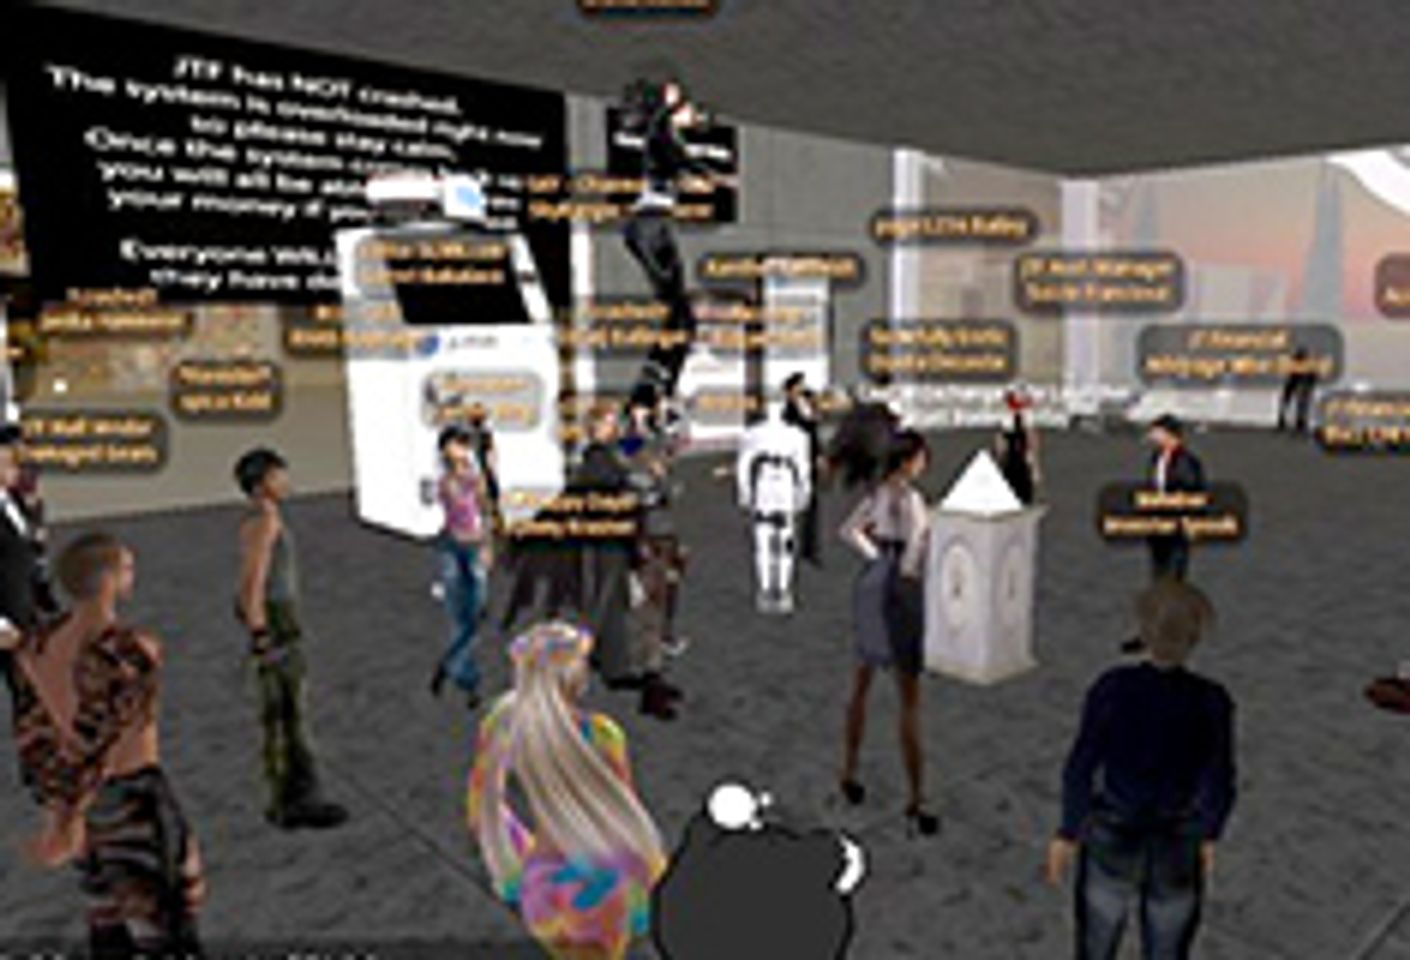 Virtual Banking Banned in Second Life